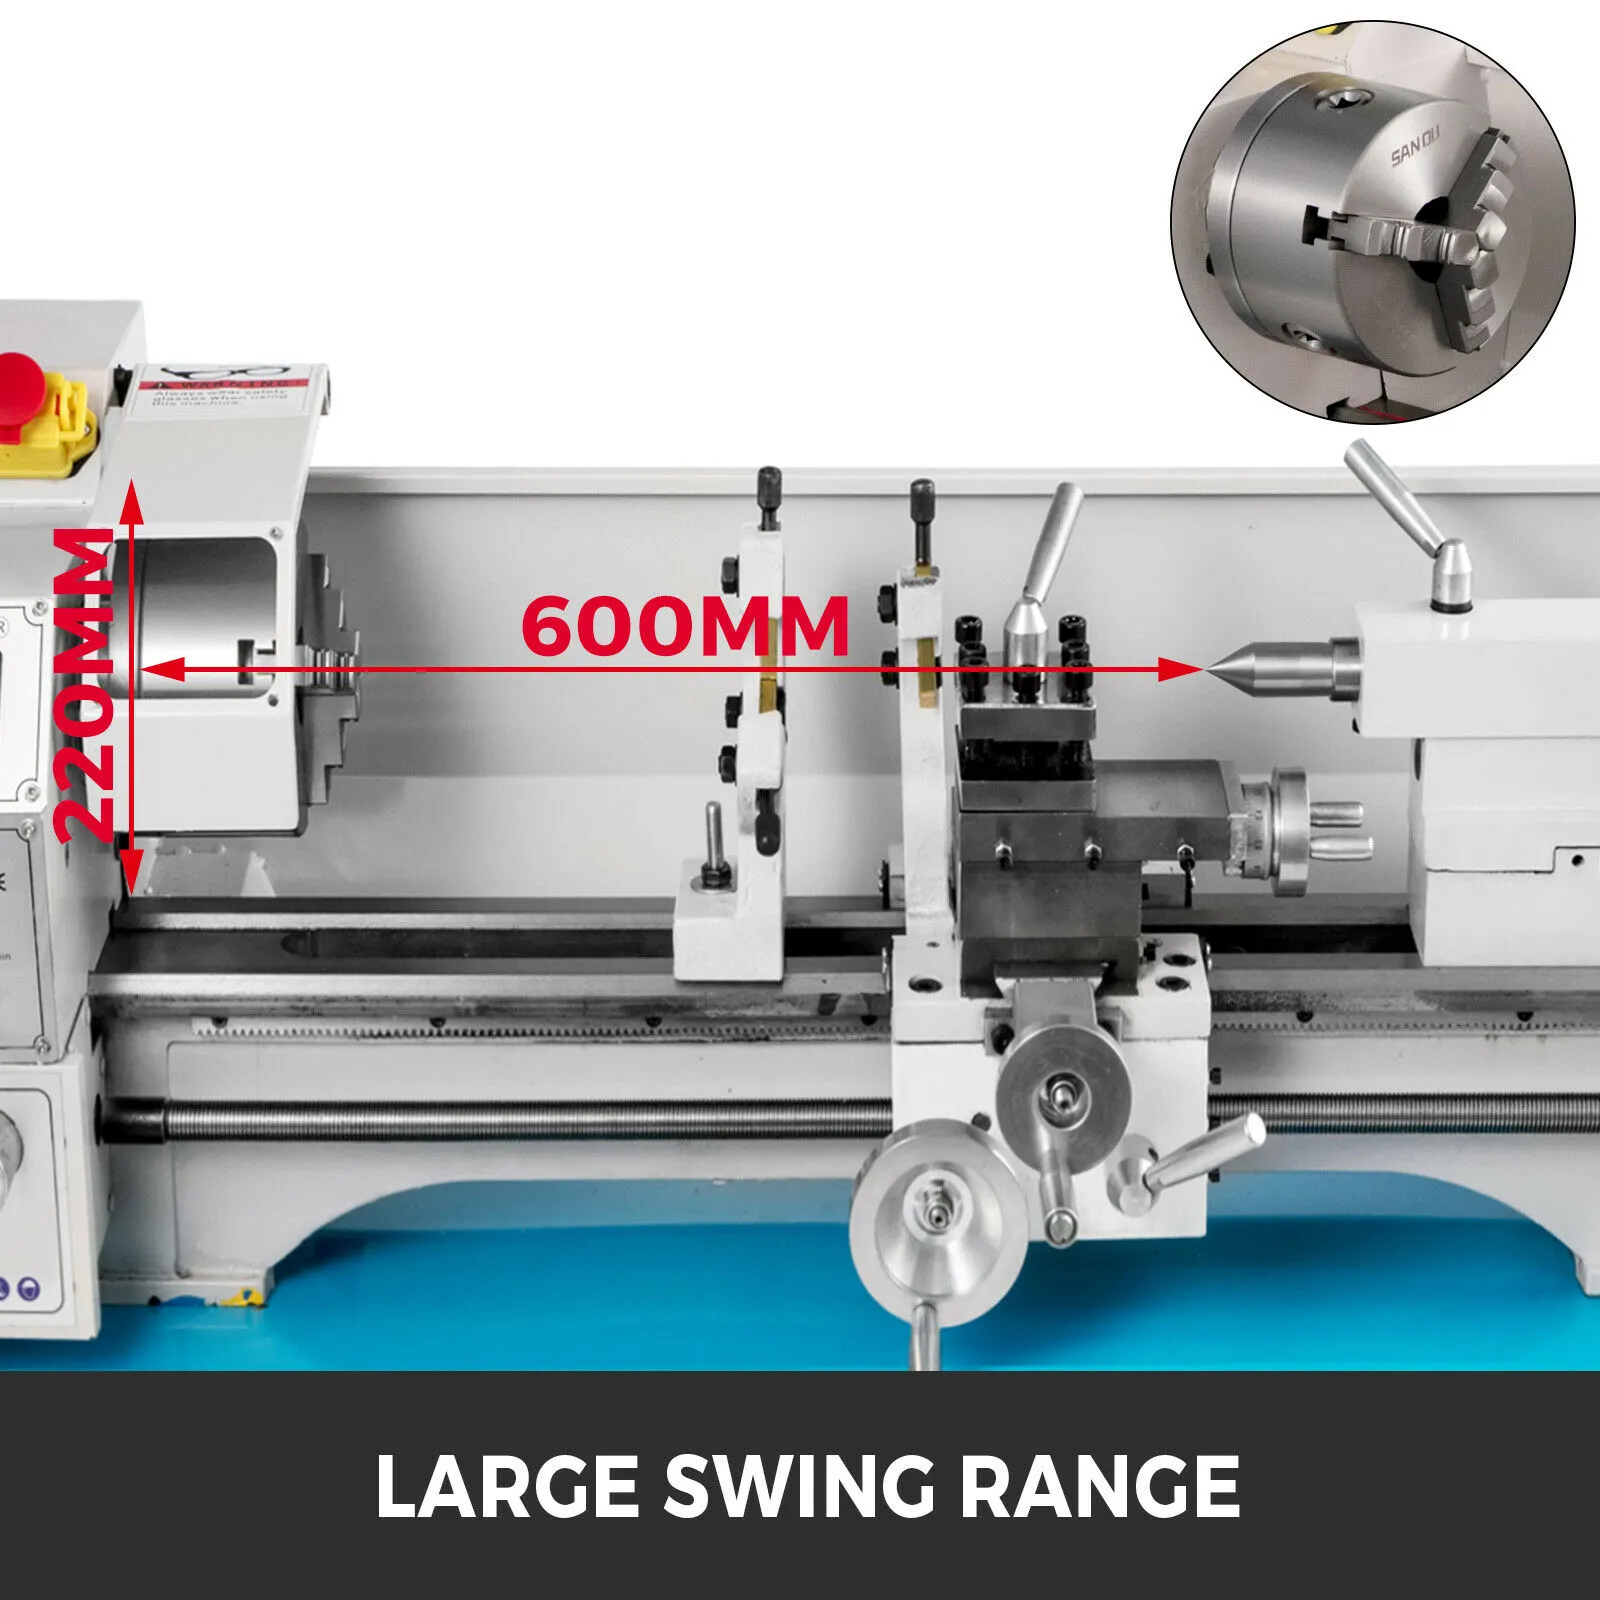 Key Factors to Consider when Choosing a Small Shop Metal Lathe